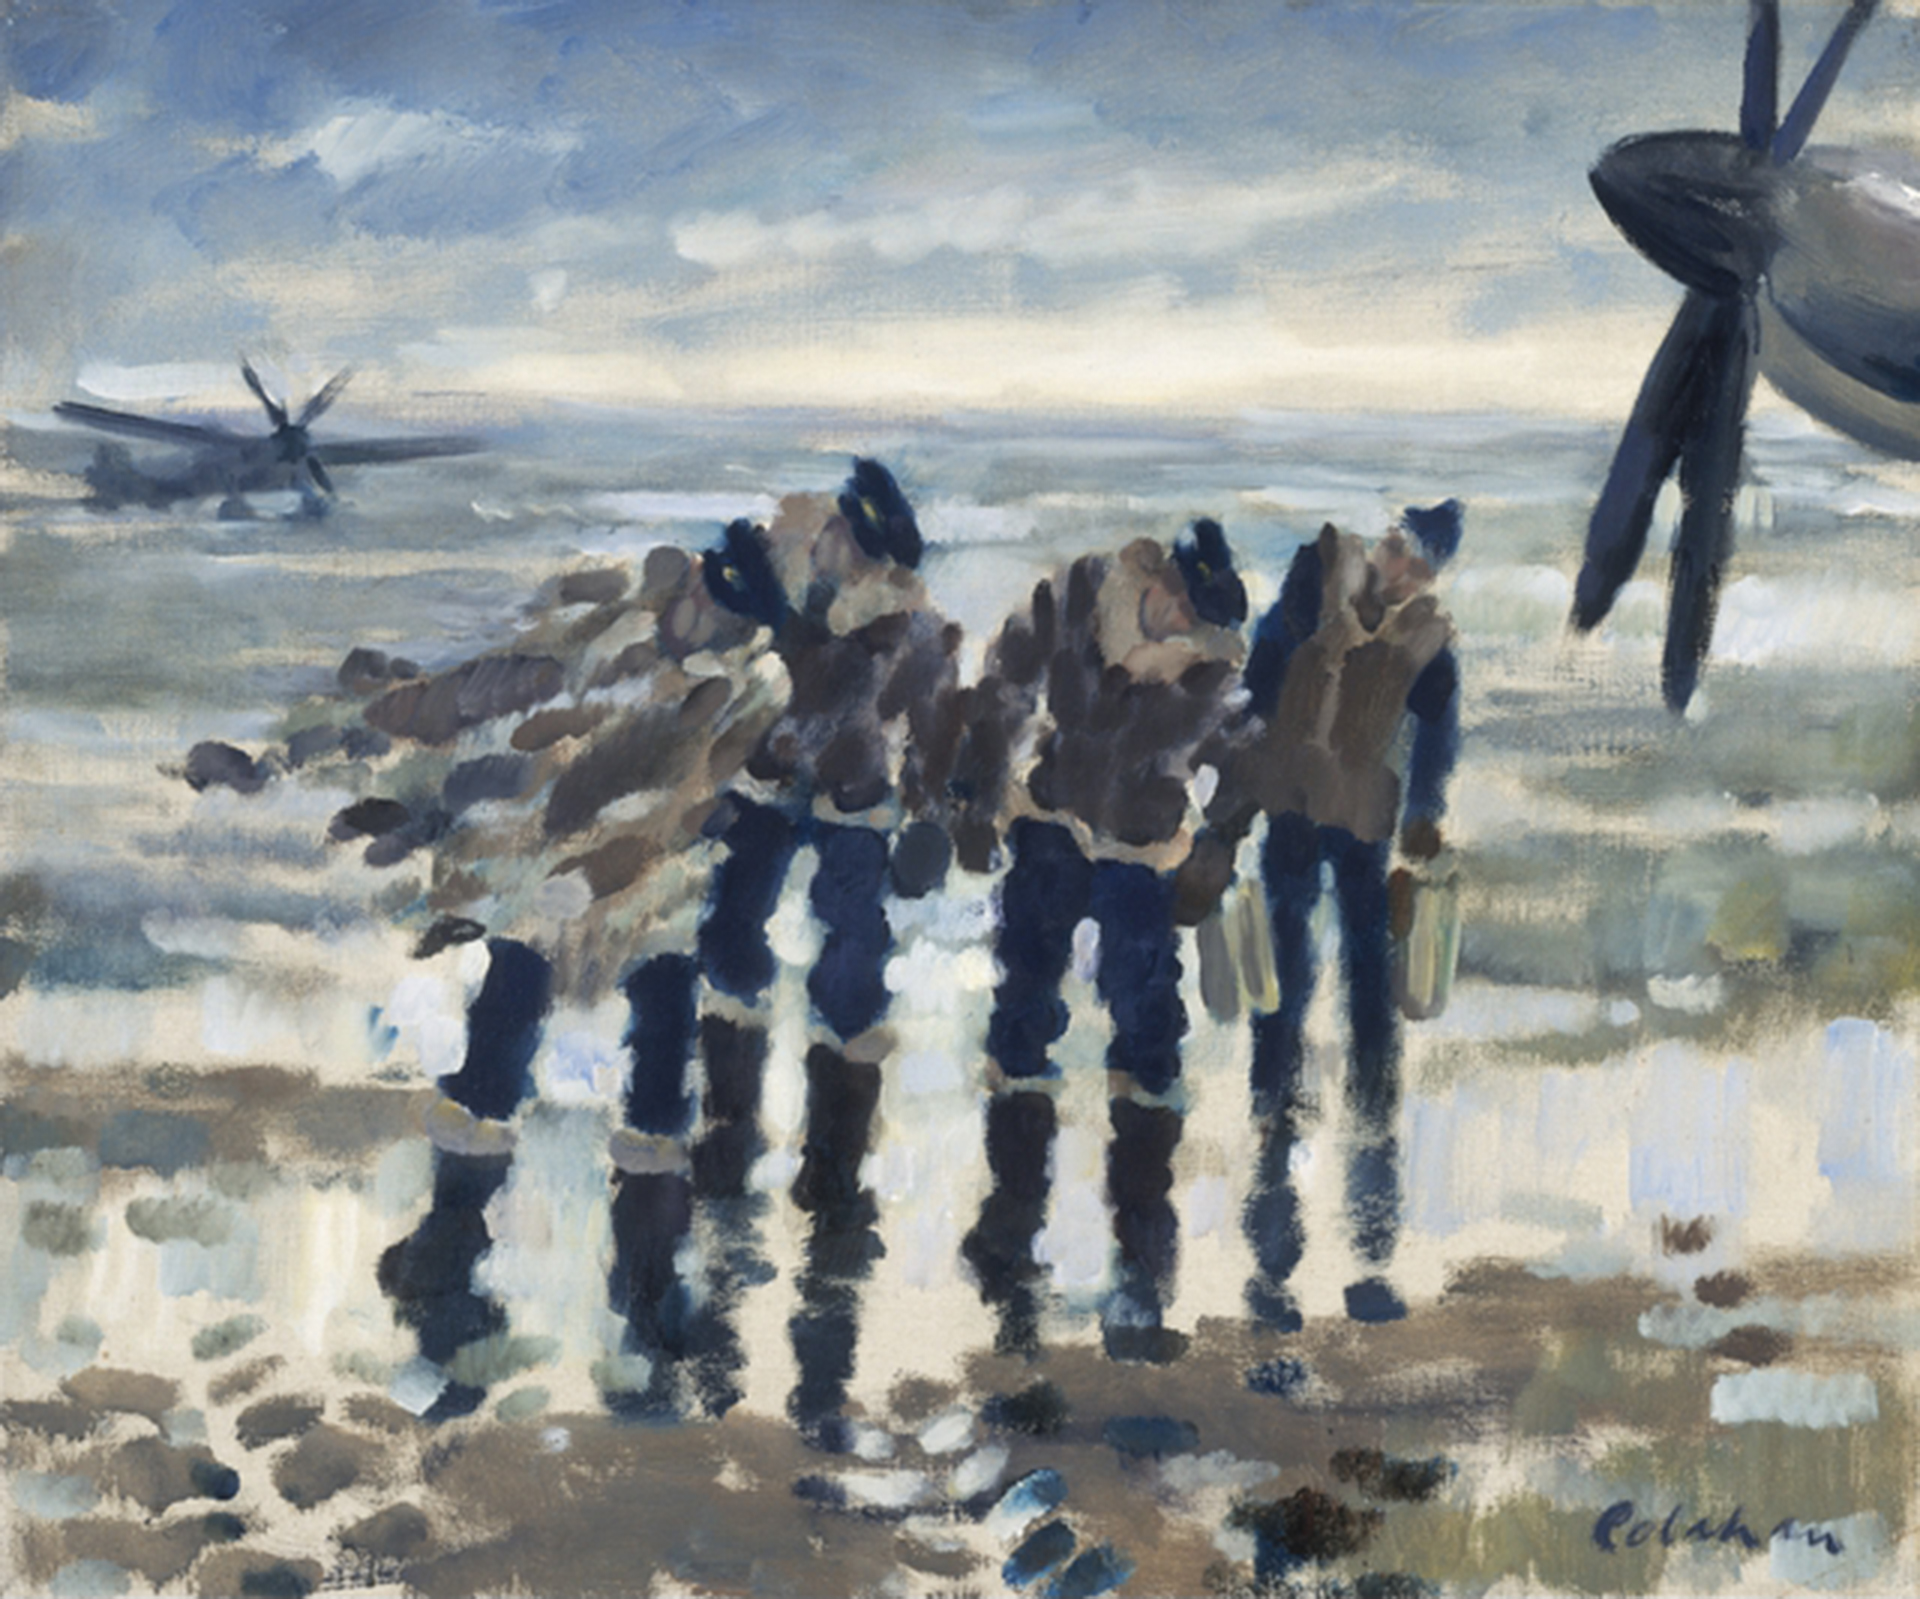 A painting of group of soldiers and old style propellor aeroplanes.